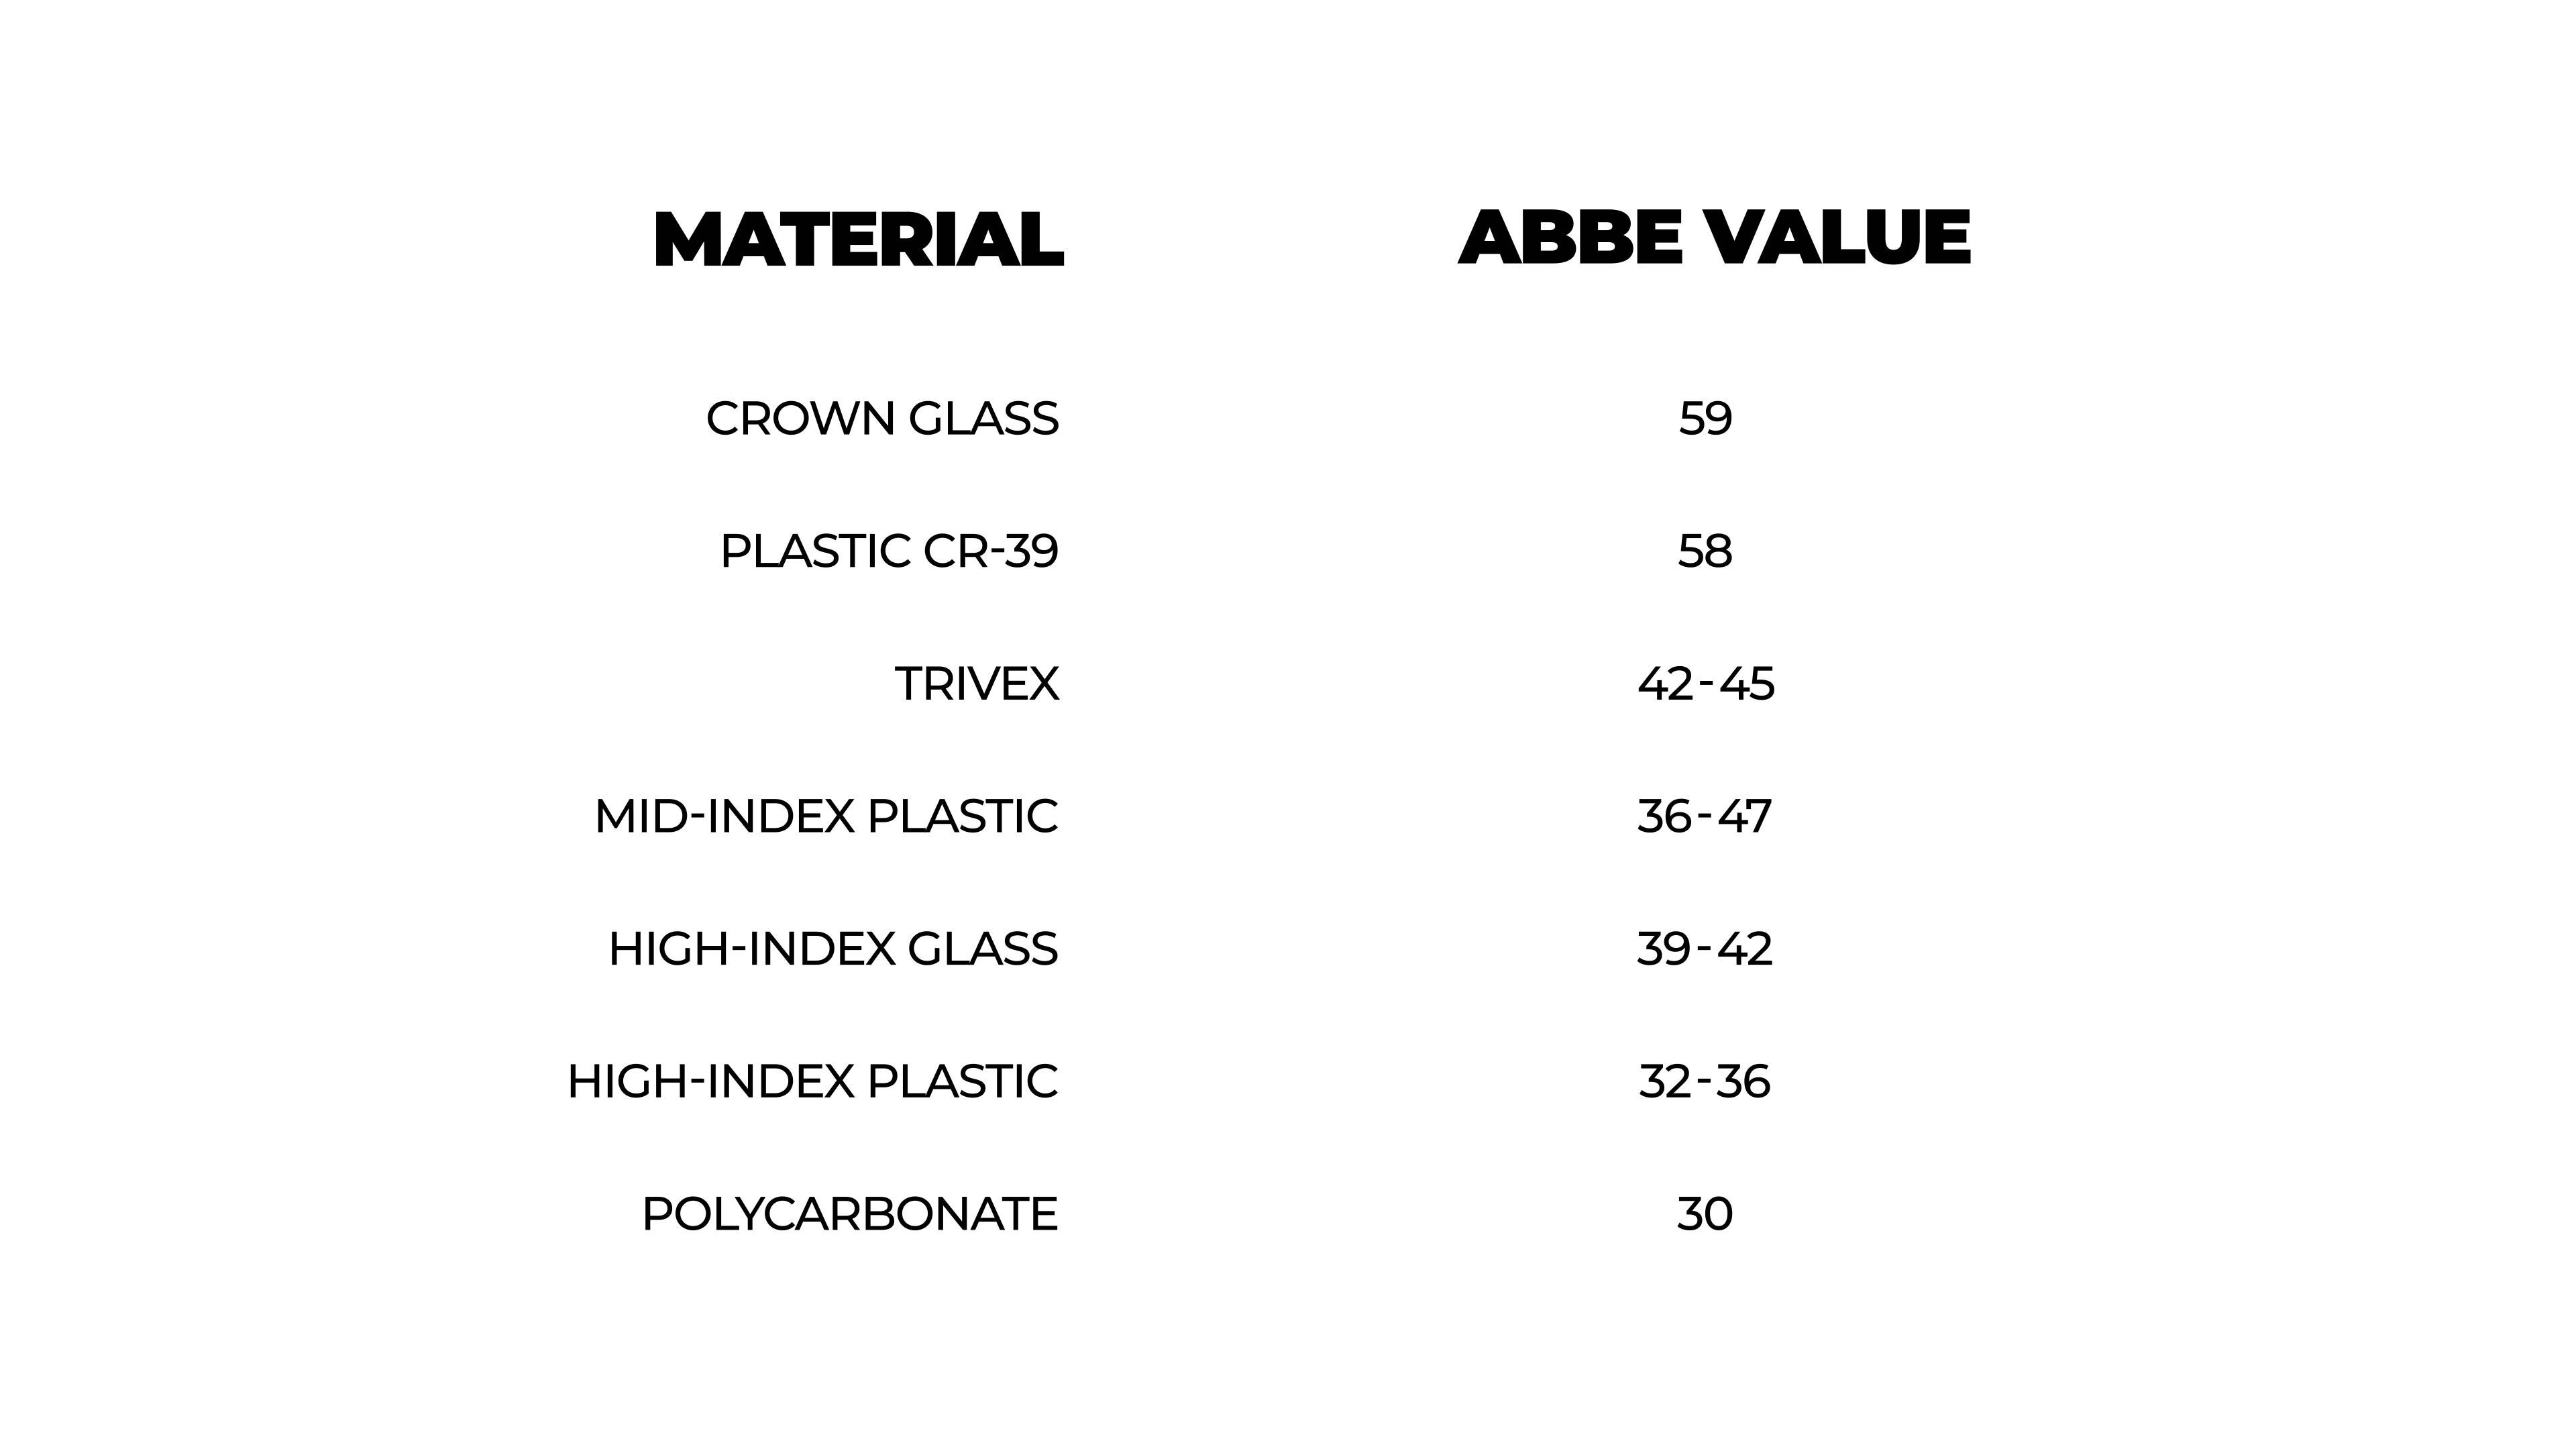 Abbe Value Chart for lens materials: crown glass, plastic CR-39, trivex, mid-index plastic, high-index glass, high-index plastic, and polycarbonate